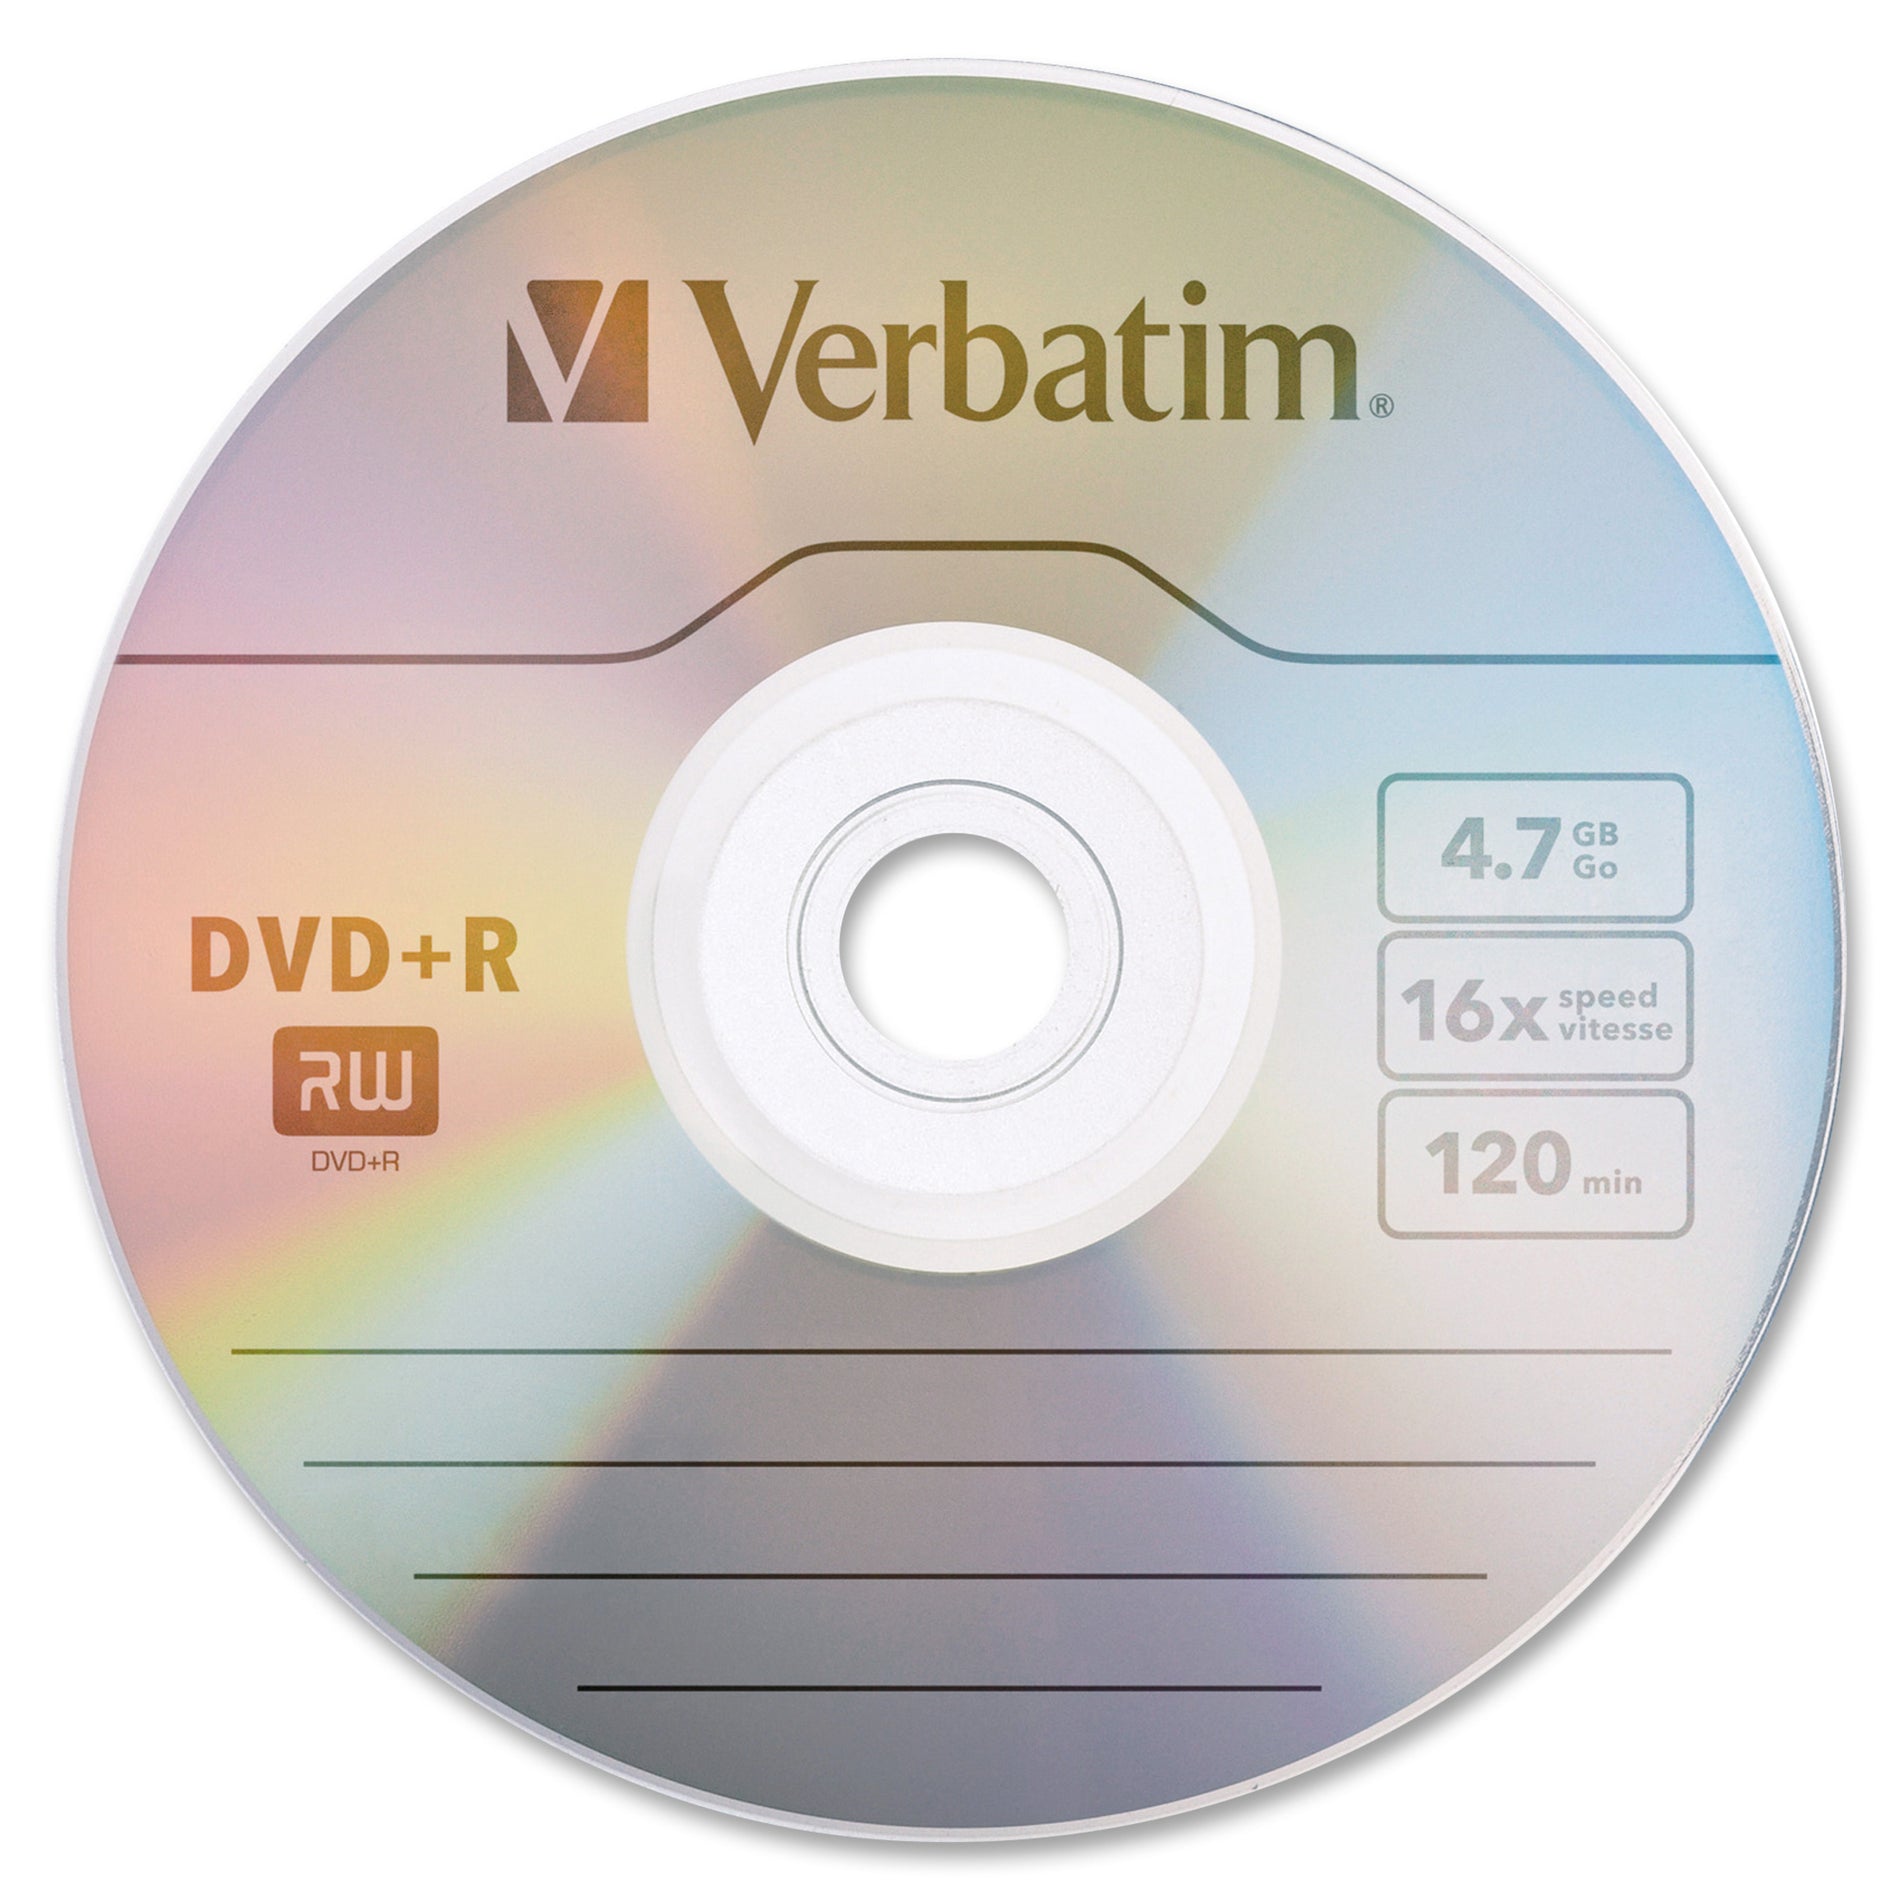 Verbatim 95102 AZO DVD-R 4.7GB 16X with Branded Surface - 100pk Spindle, 120 Minutes